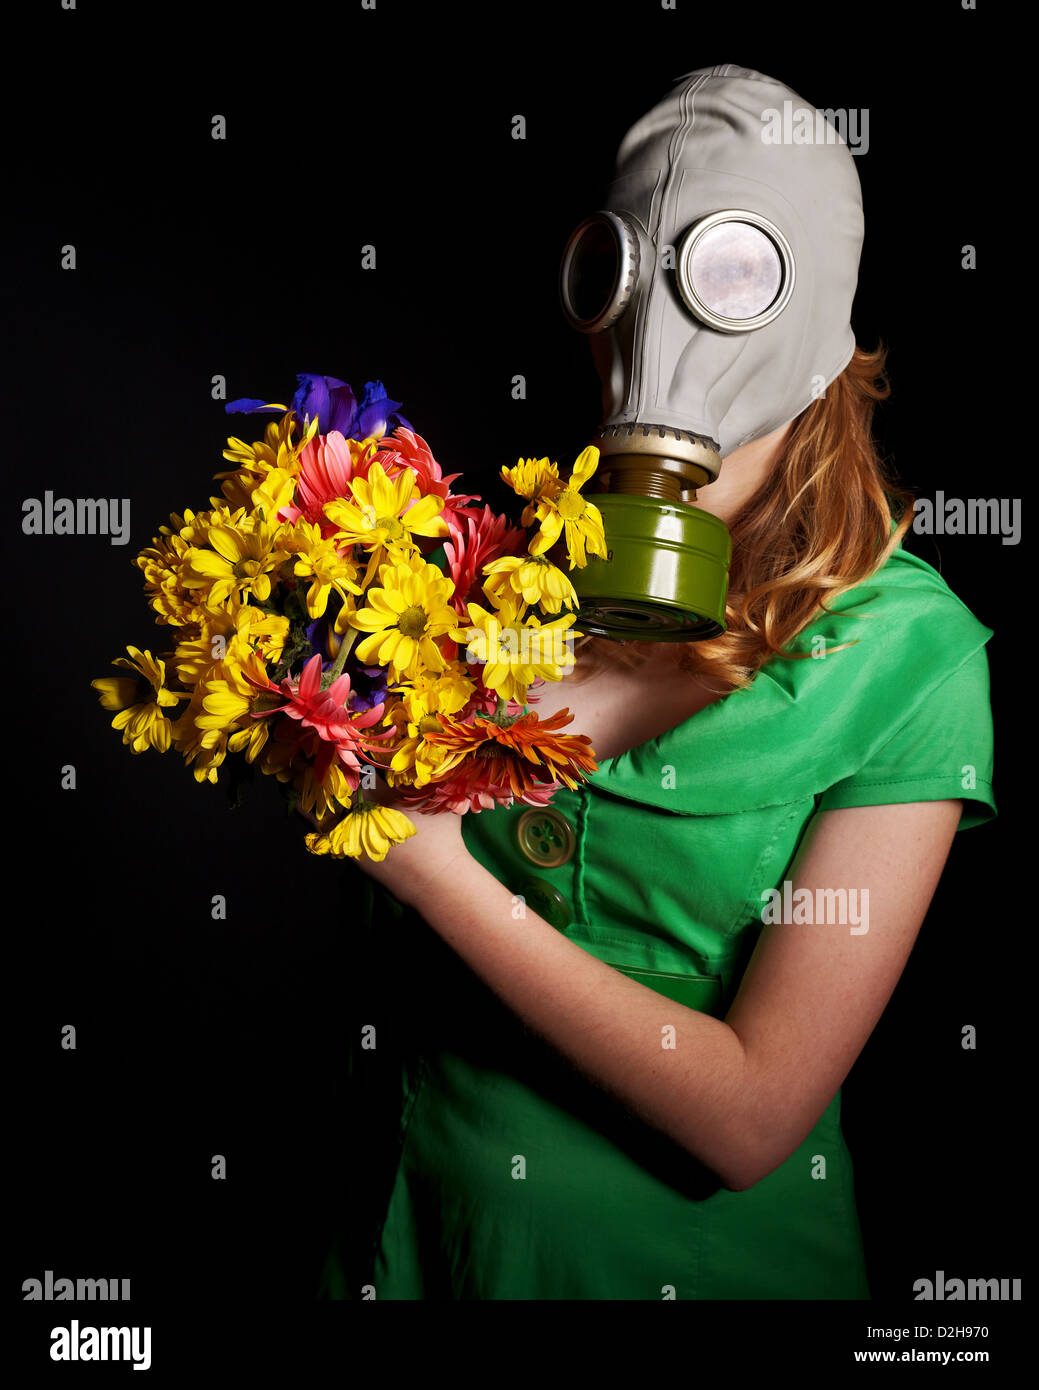 Woman holding flowers and gas mask Stock Photo - Alamy